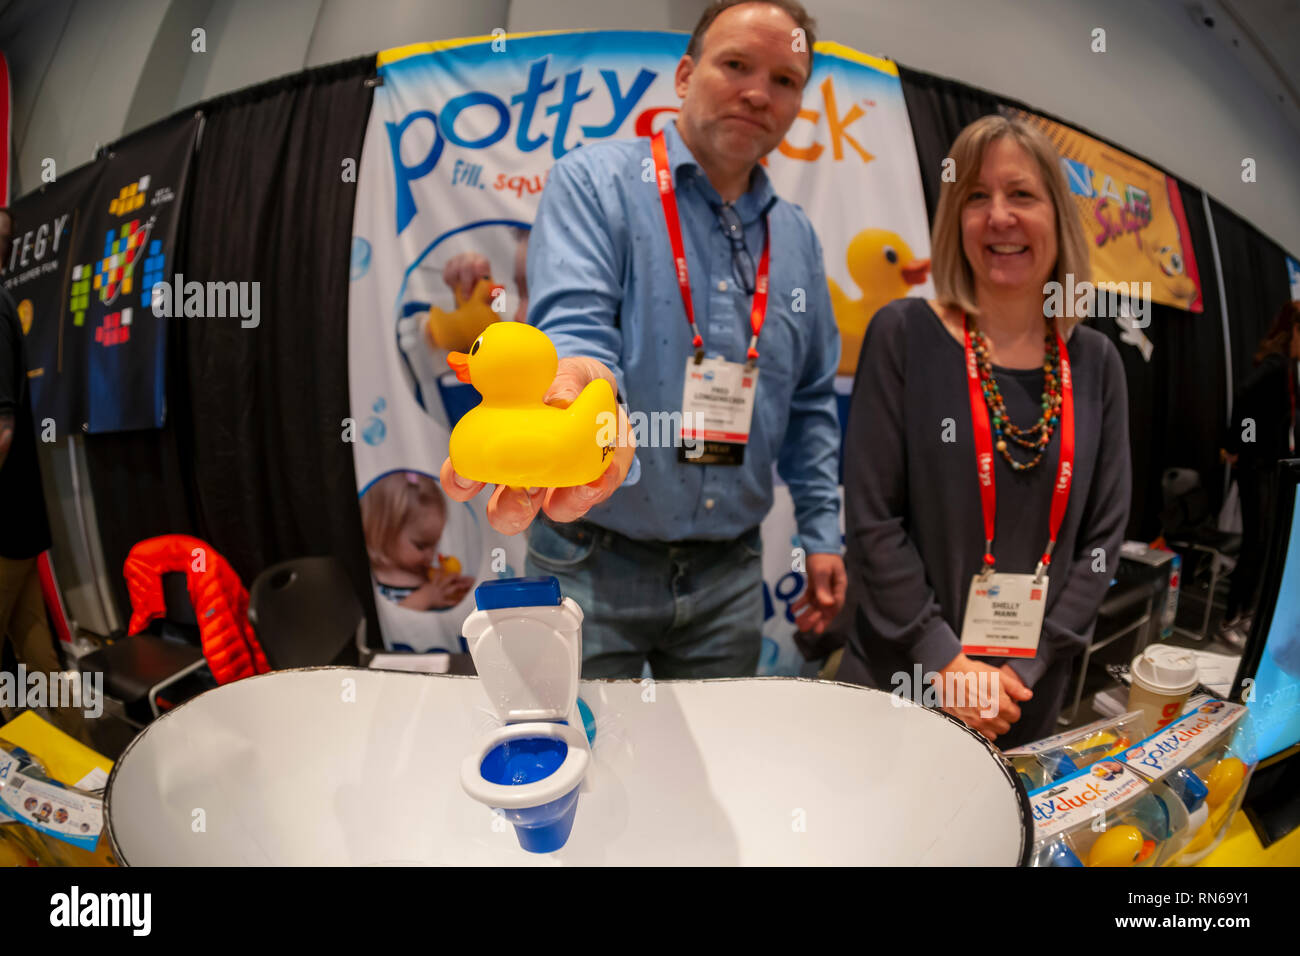 New York, USA. 17th Feb, 2019. Co-inventors Fred Longenecker and Shelly Mann demonstrate the Pottyduck toilet training toy at The 116th North American International Toy Fair in the Jacob Javits Convention center in New York on Sunday, February 17, 2019. The four day trade show with over 1000 exhibitors connects buyers and sellers and draws tens of thousands of attendees. The toy industry generates over $26 billion in the U.S. alone and Toy Fair is the largest toy trade show in the Western Hemisphere. ( © Richard B. Levine) Credit: Richard Levine/Alamy Live News Stock Photo